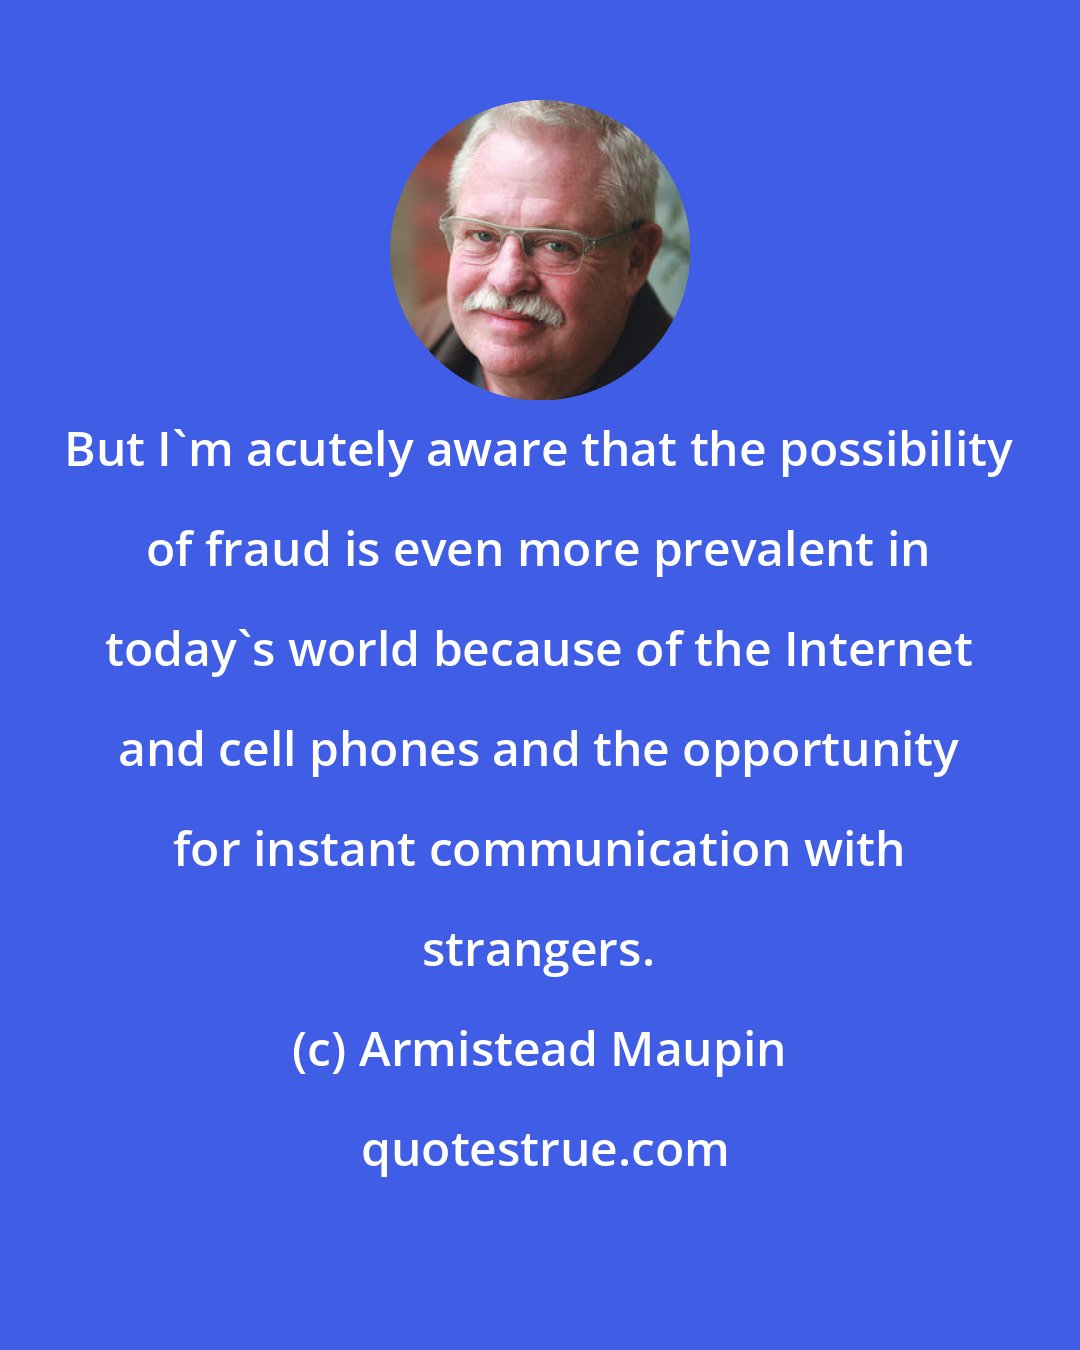 Armistead Maupin: But I'm acutely aware that the possibility of fraud is even more prevalent in today's world because of the Internet and cell phones and the opportunity for instant communication with strangers.